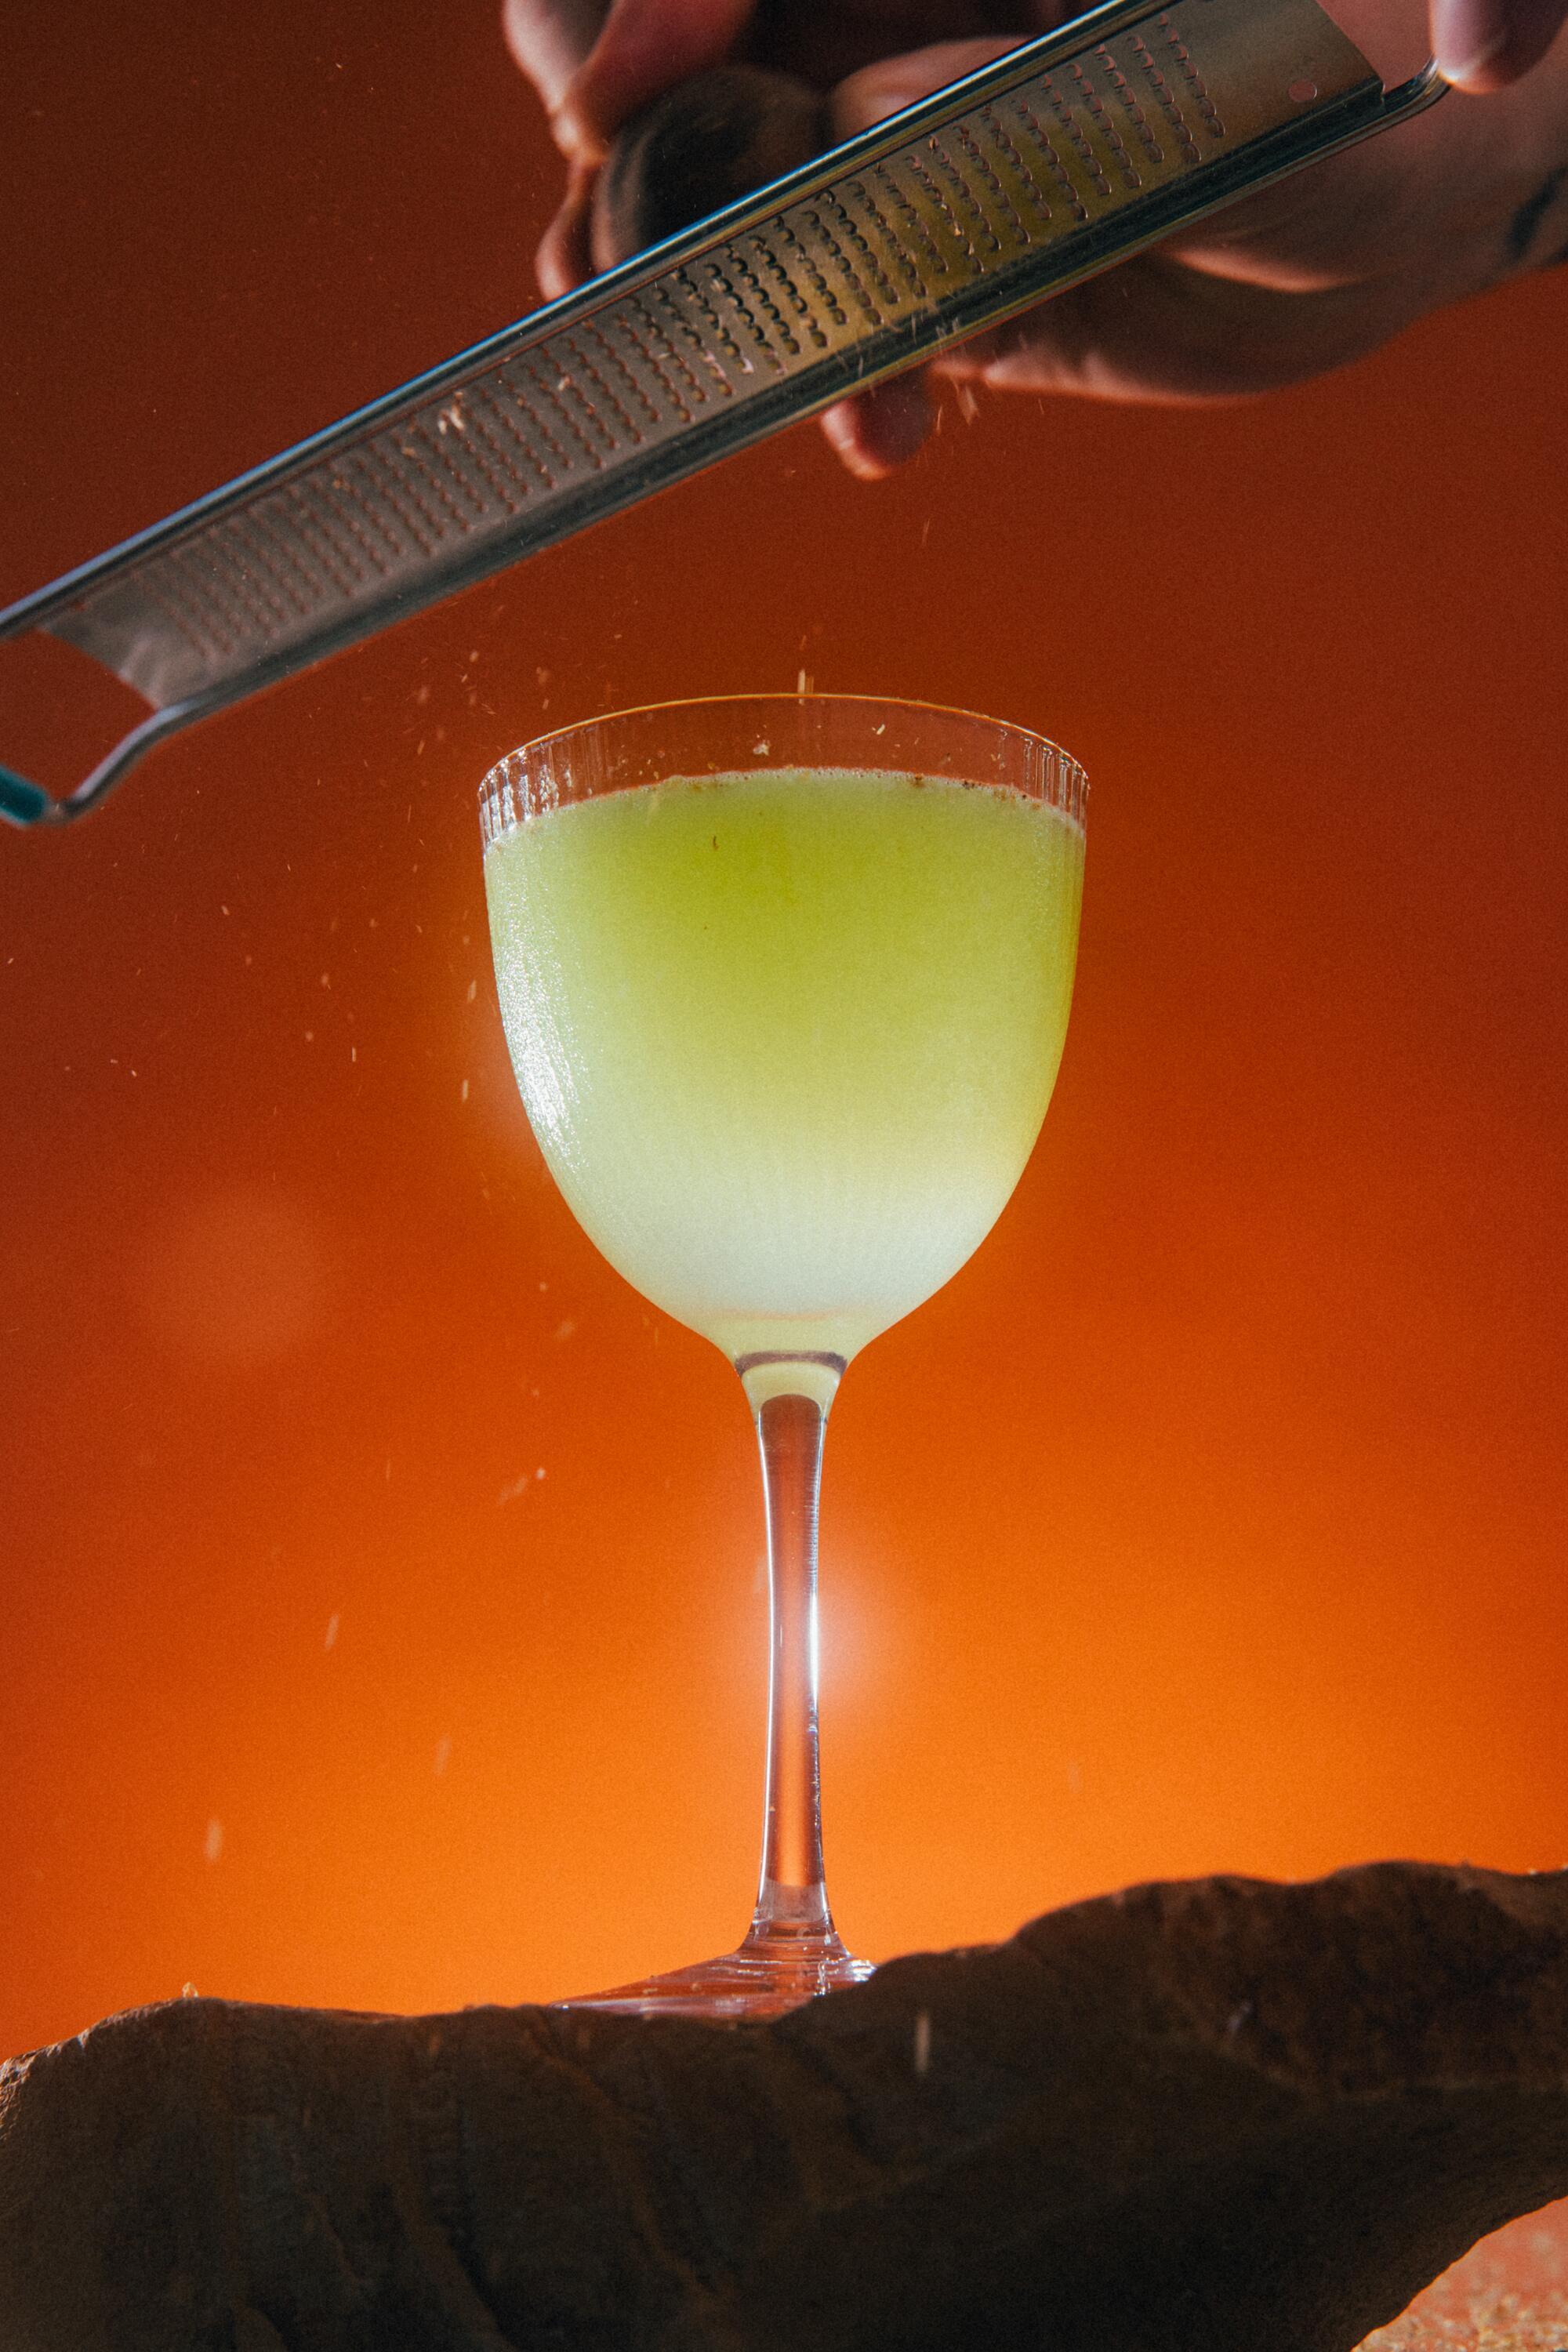 A green cocktail glows in front of an orange background. Above it, a hand grates black-lime zest into the drink.